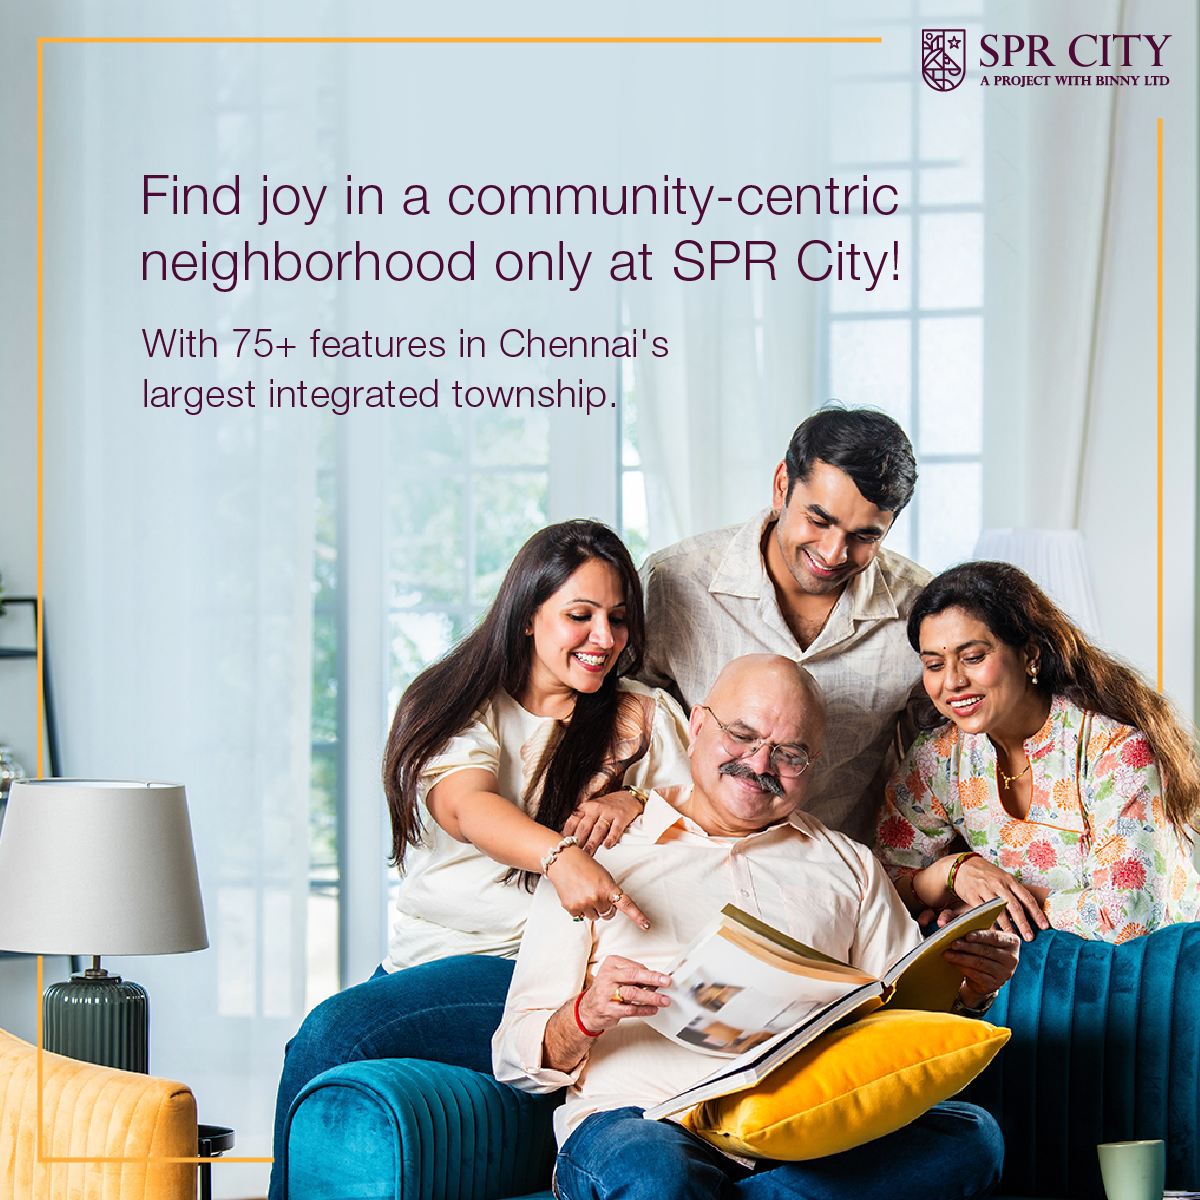 With 75+ joyous features to cater to every desire, SPR City merges luxury lifestyle with ultra-modern design to redefine your living experience in Chennai. Join us and experience the warmth of a neighborhood that feels like an extended home.

#SPRCity #IntegratedTownship